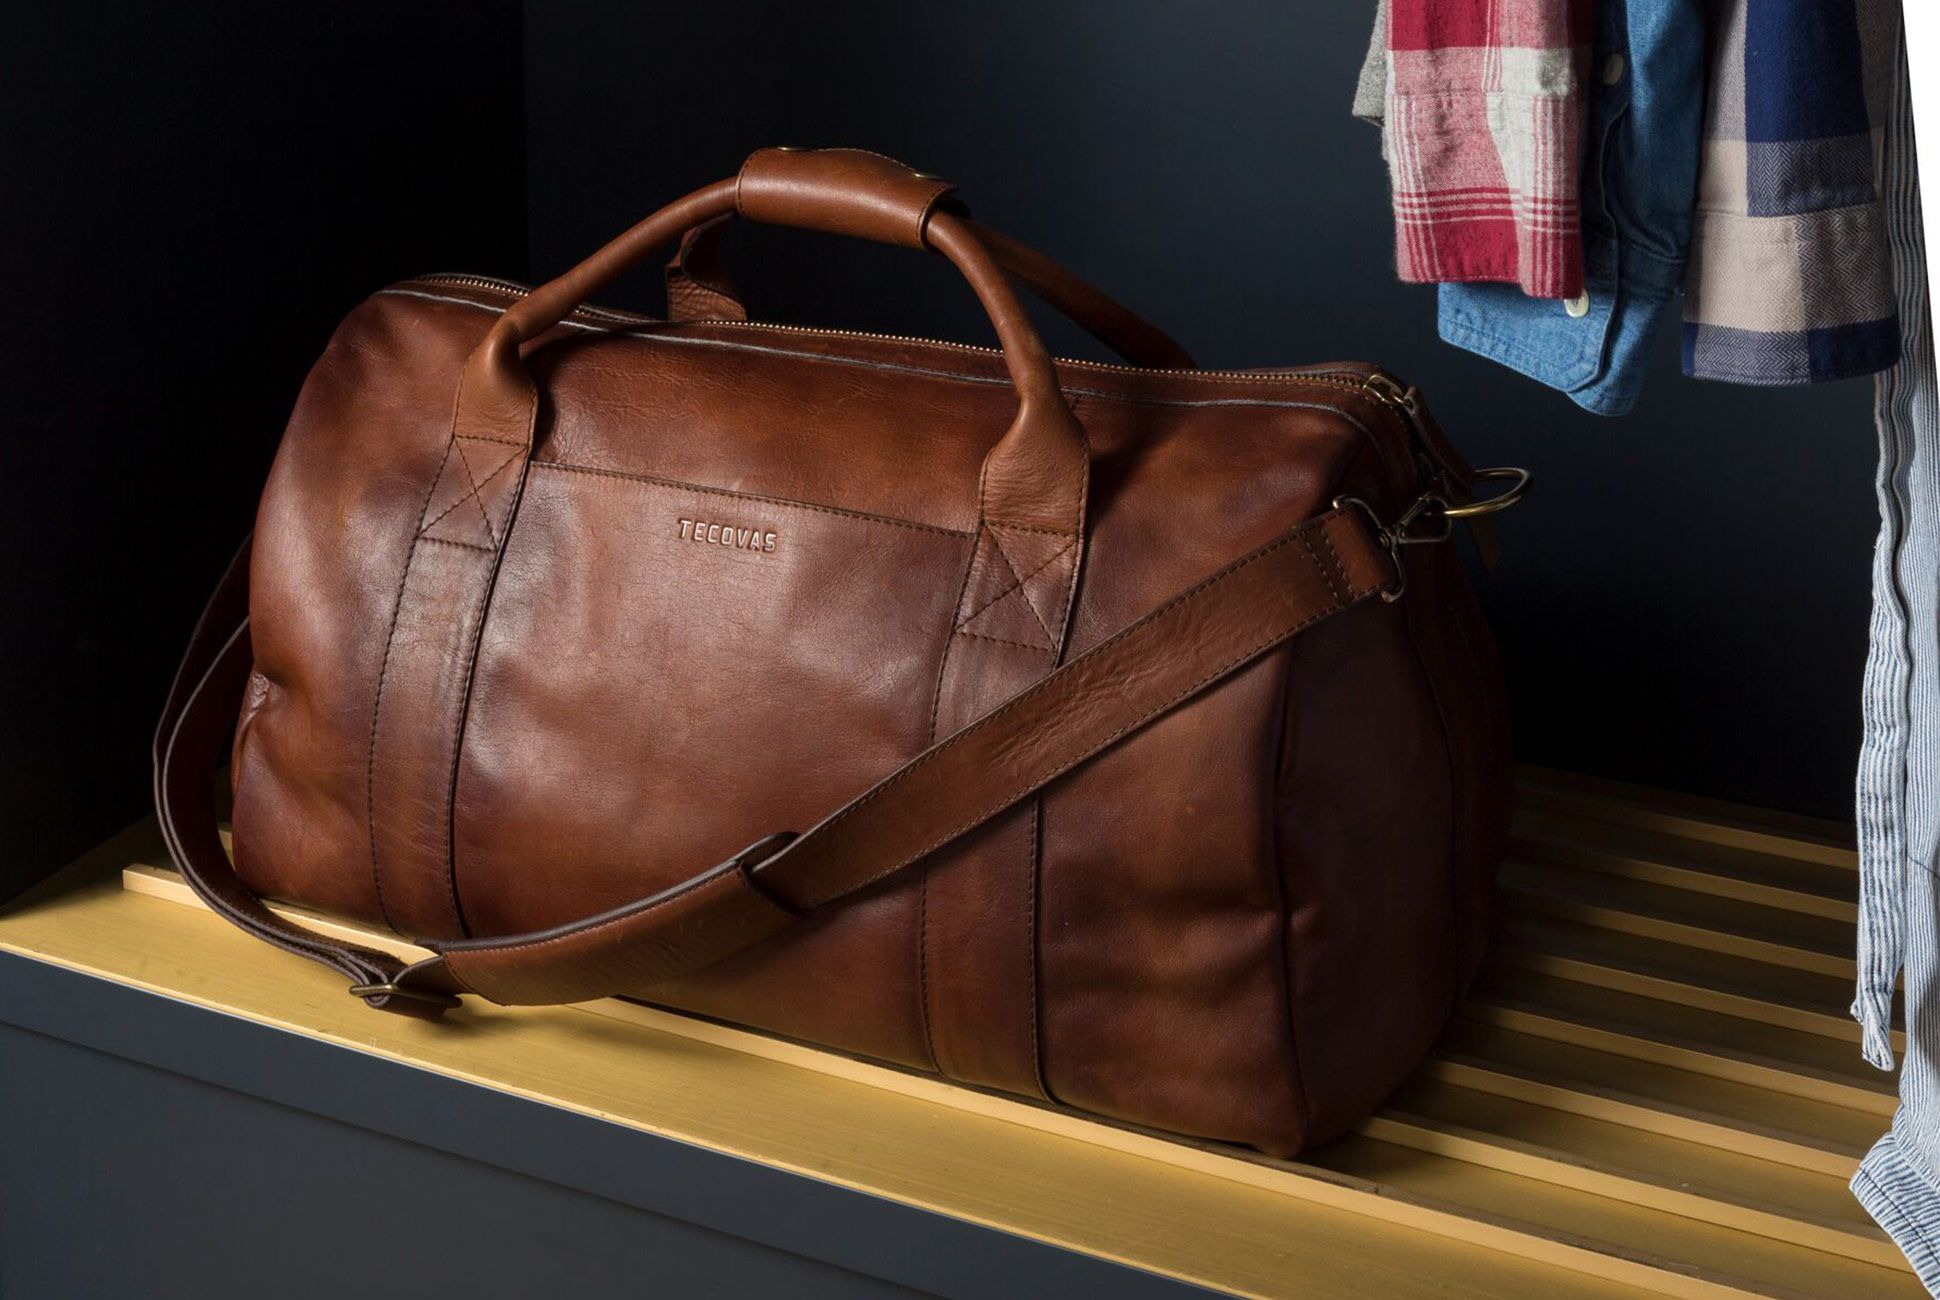 affordable leather duffle bags